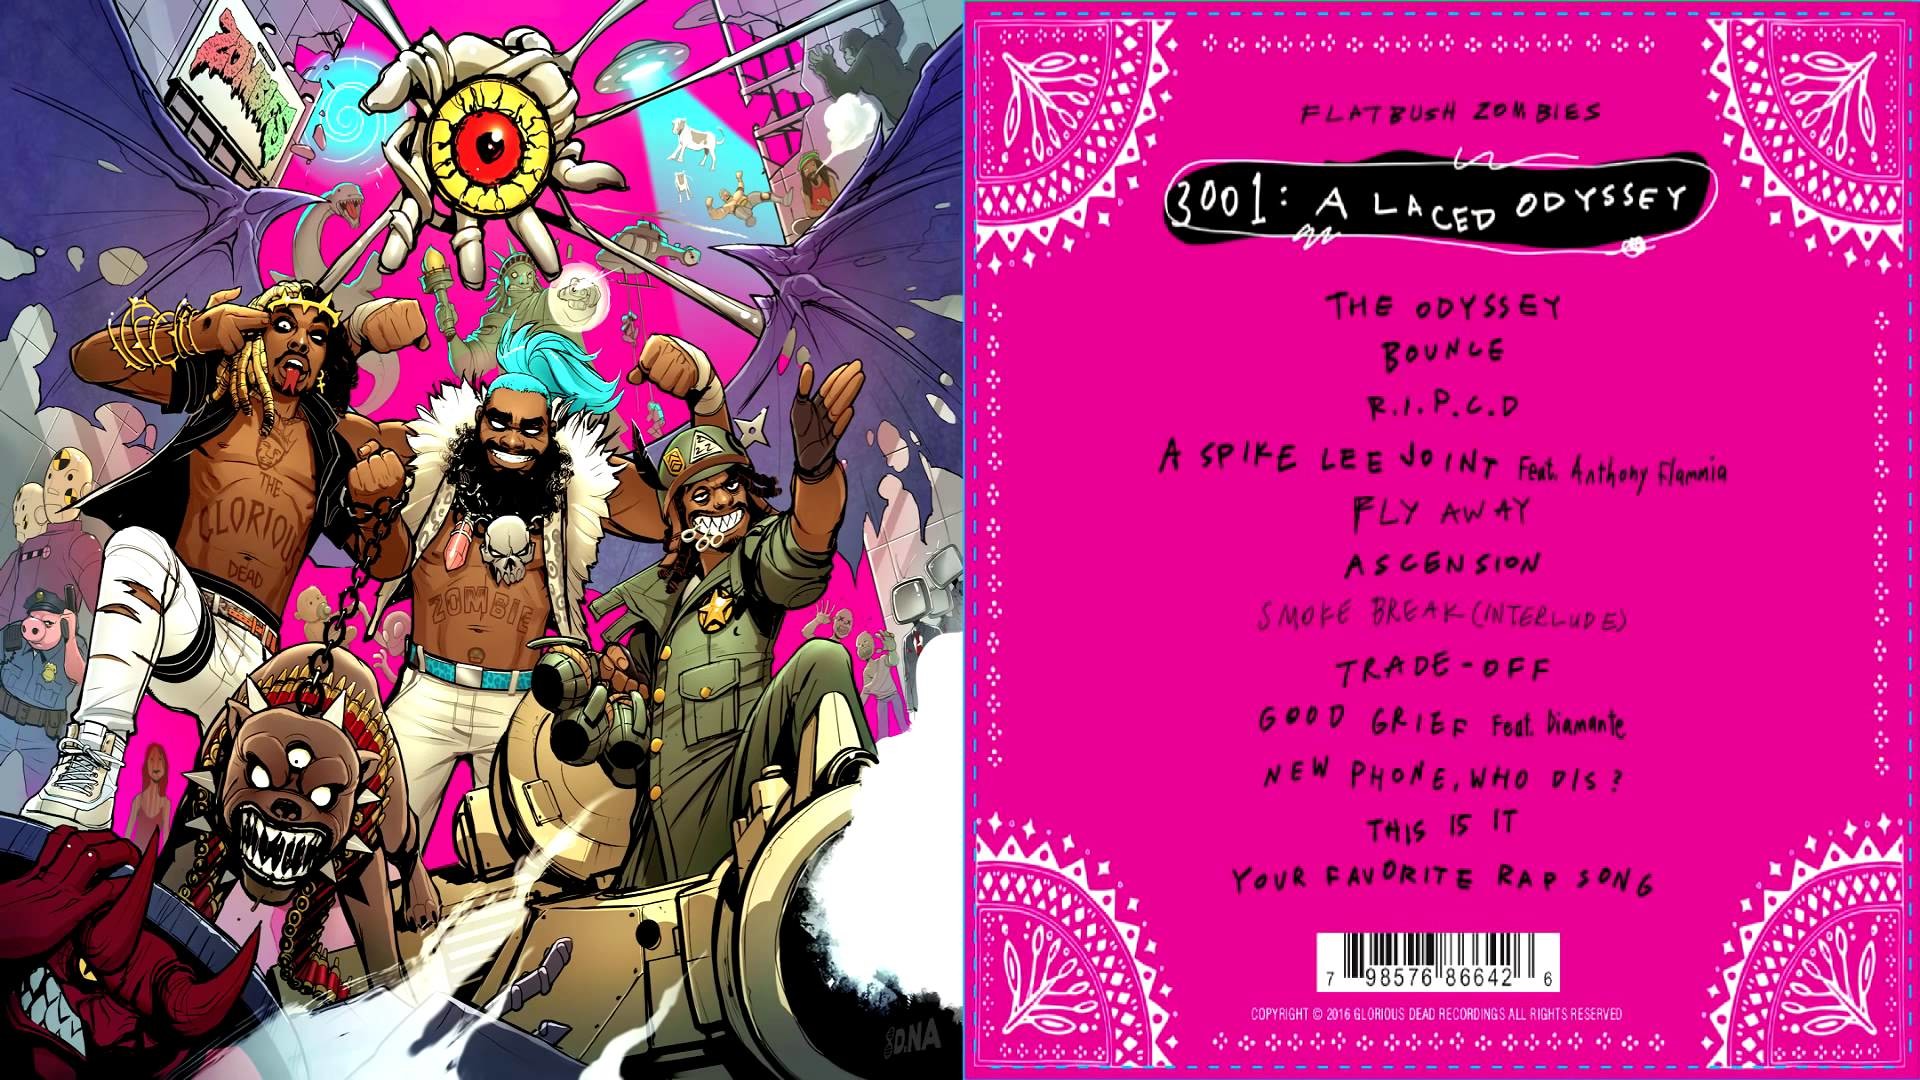 1920x1080 Flatbush ZOMBiES New Phone, Who Dis 3001 A Laced Odyssey DOWNLOAD BUY